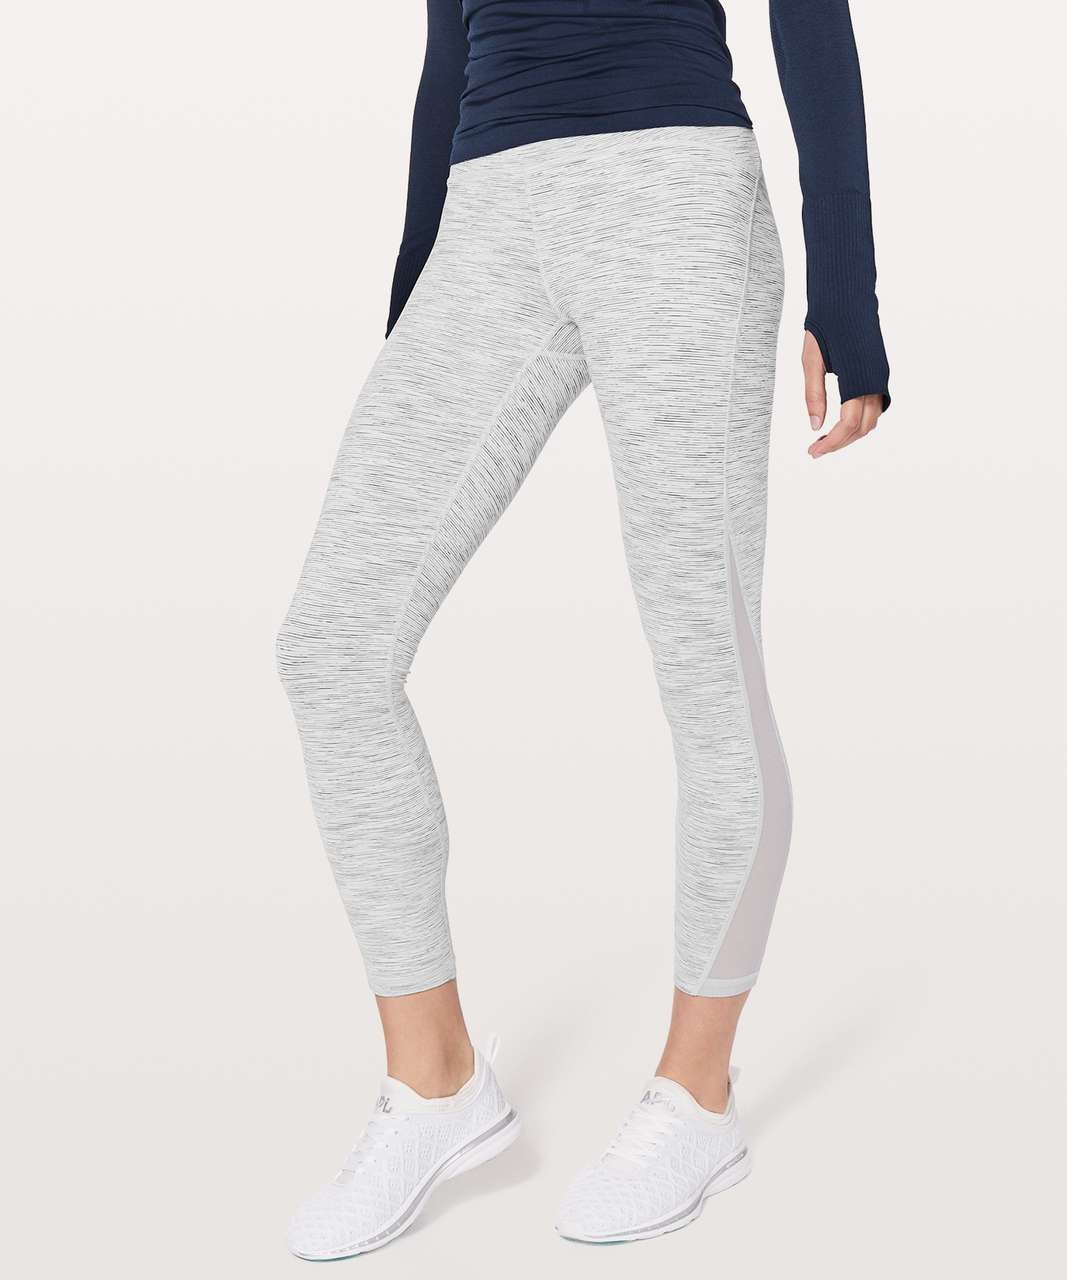 Lululemon Train Times 7/8 Pant *25" - Wee Are From Space Ice Grey Alpine White